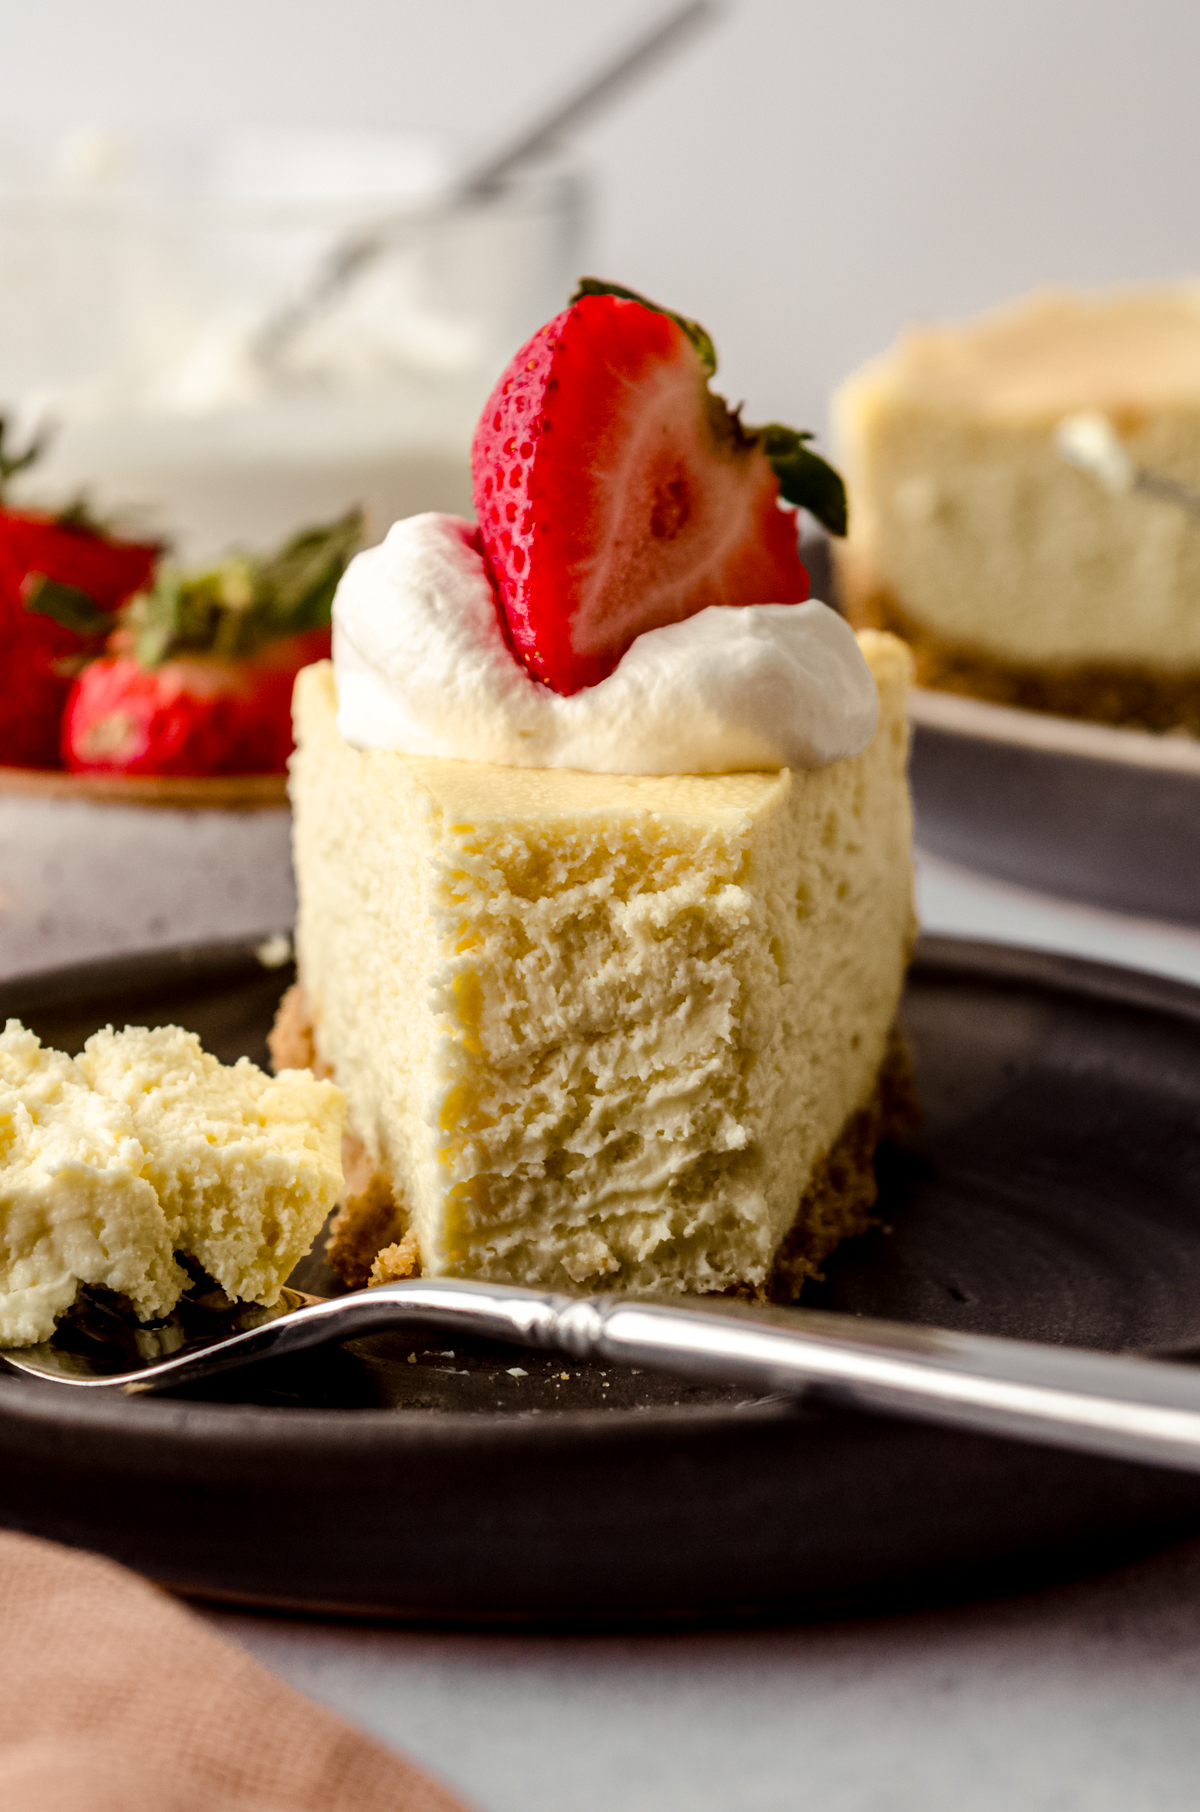 A slice of classic cheesecake with whipped cream and a strawberry on a plate. Someone has taken a bite from the cheesecake with a fork.